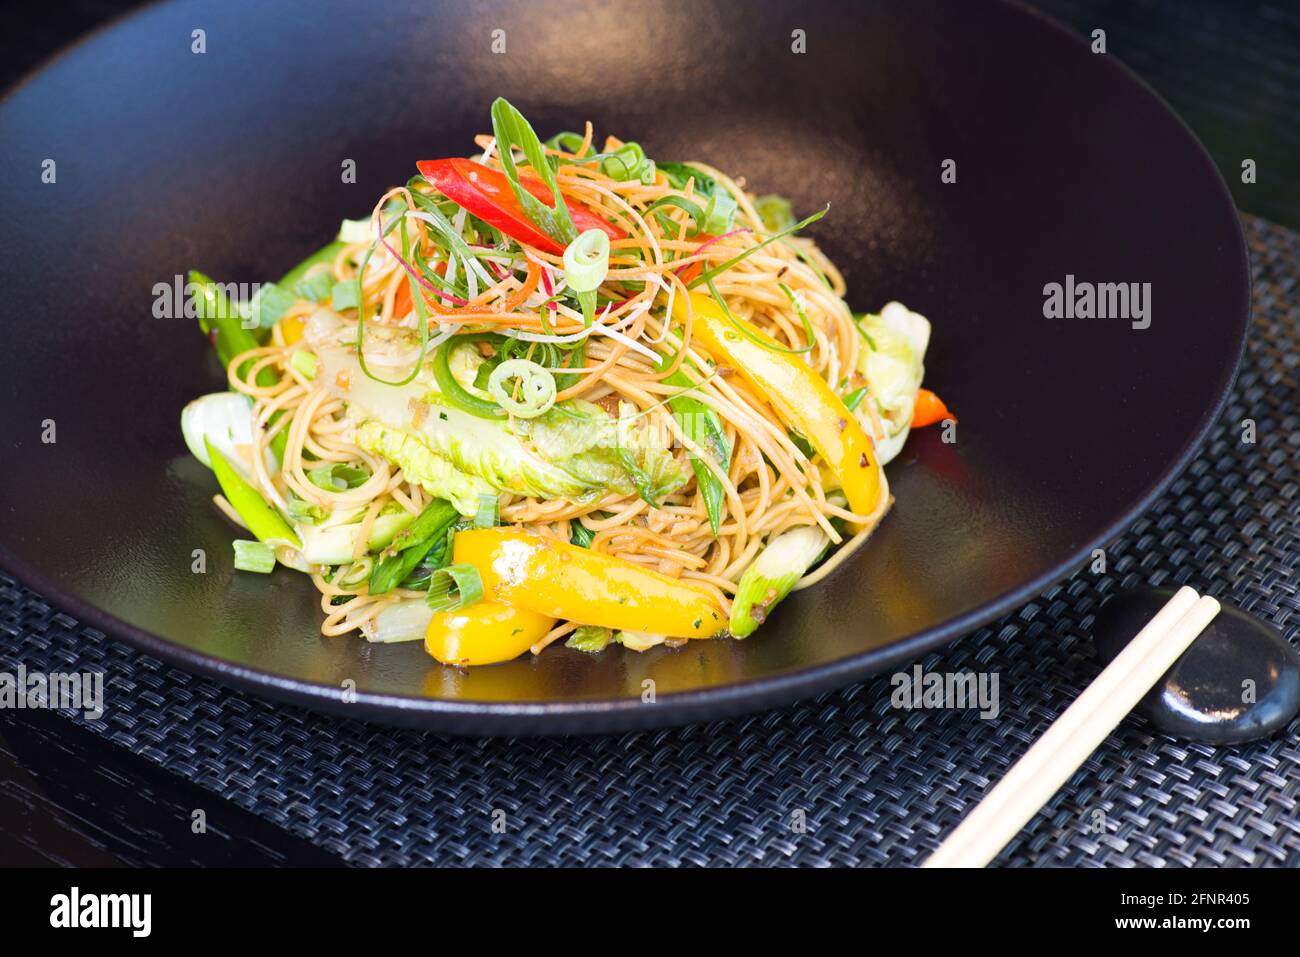 Spaghetti noodle with vegetables Stock Photo